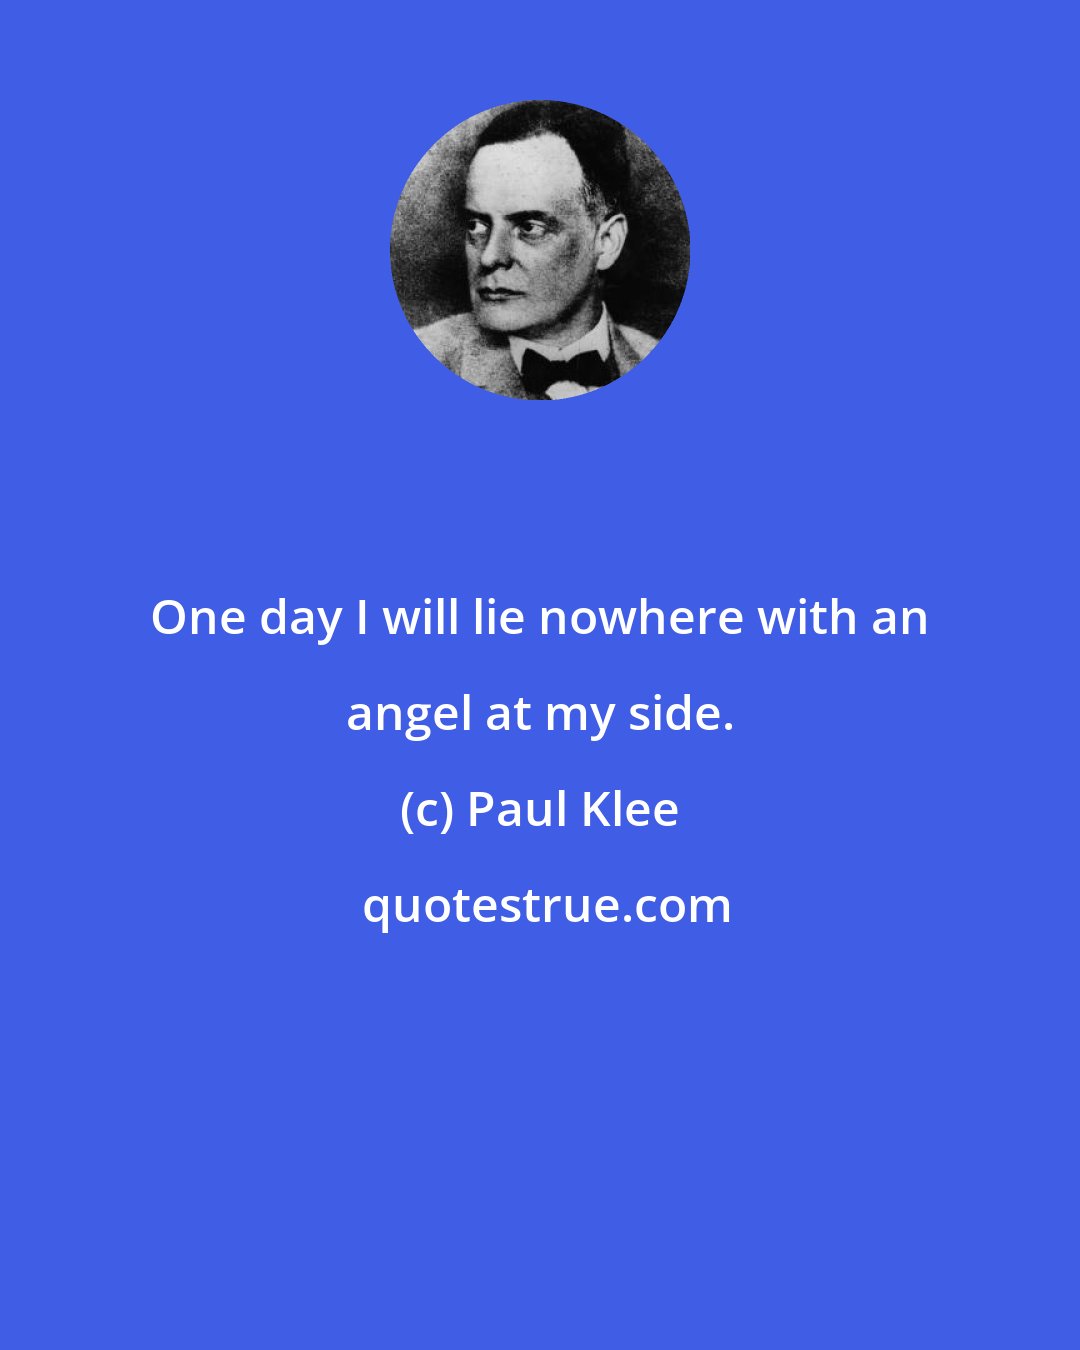 Paul Klee: One day I will lie nowhere with an angel at my side.